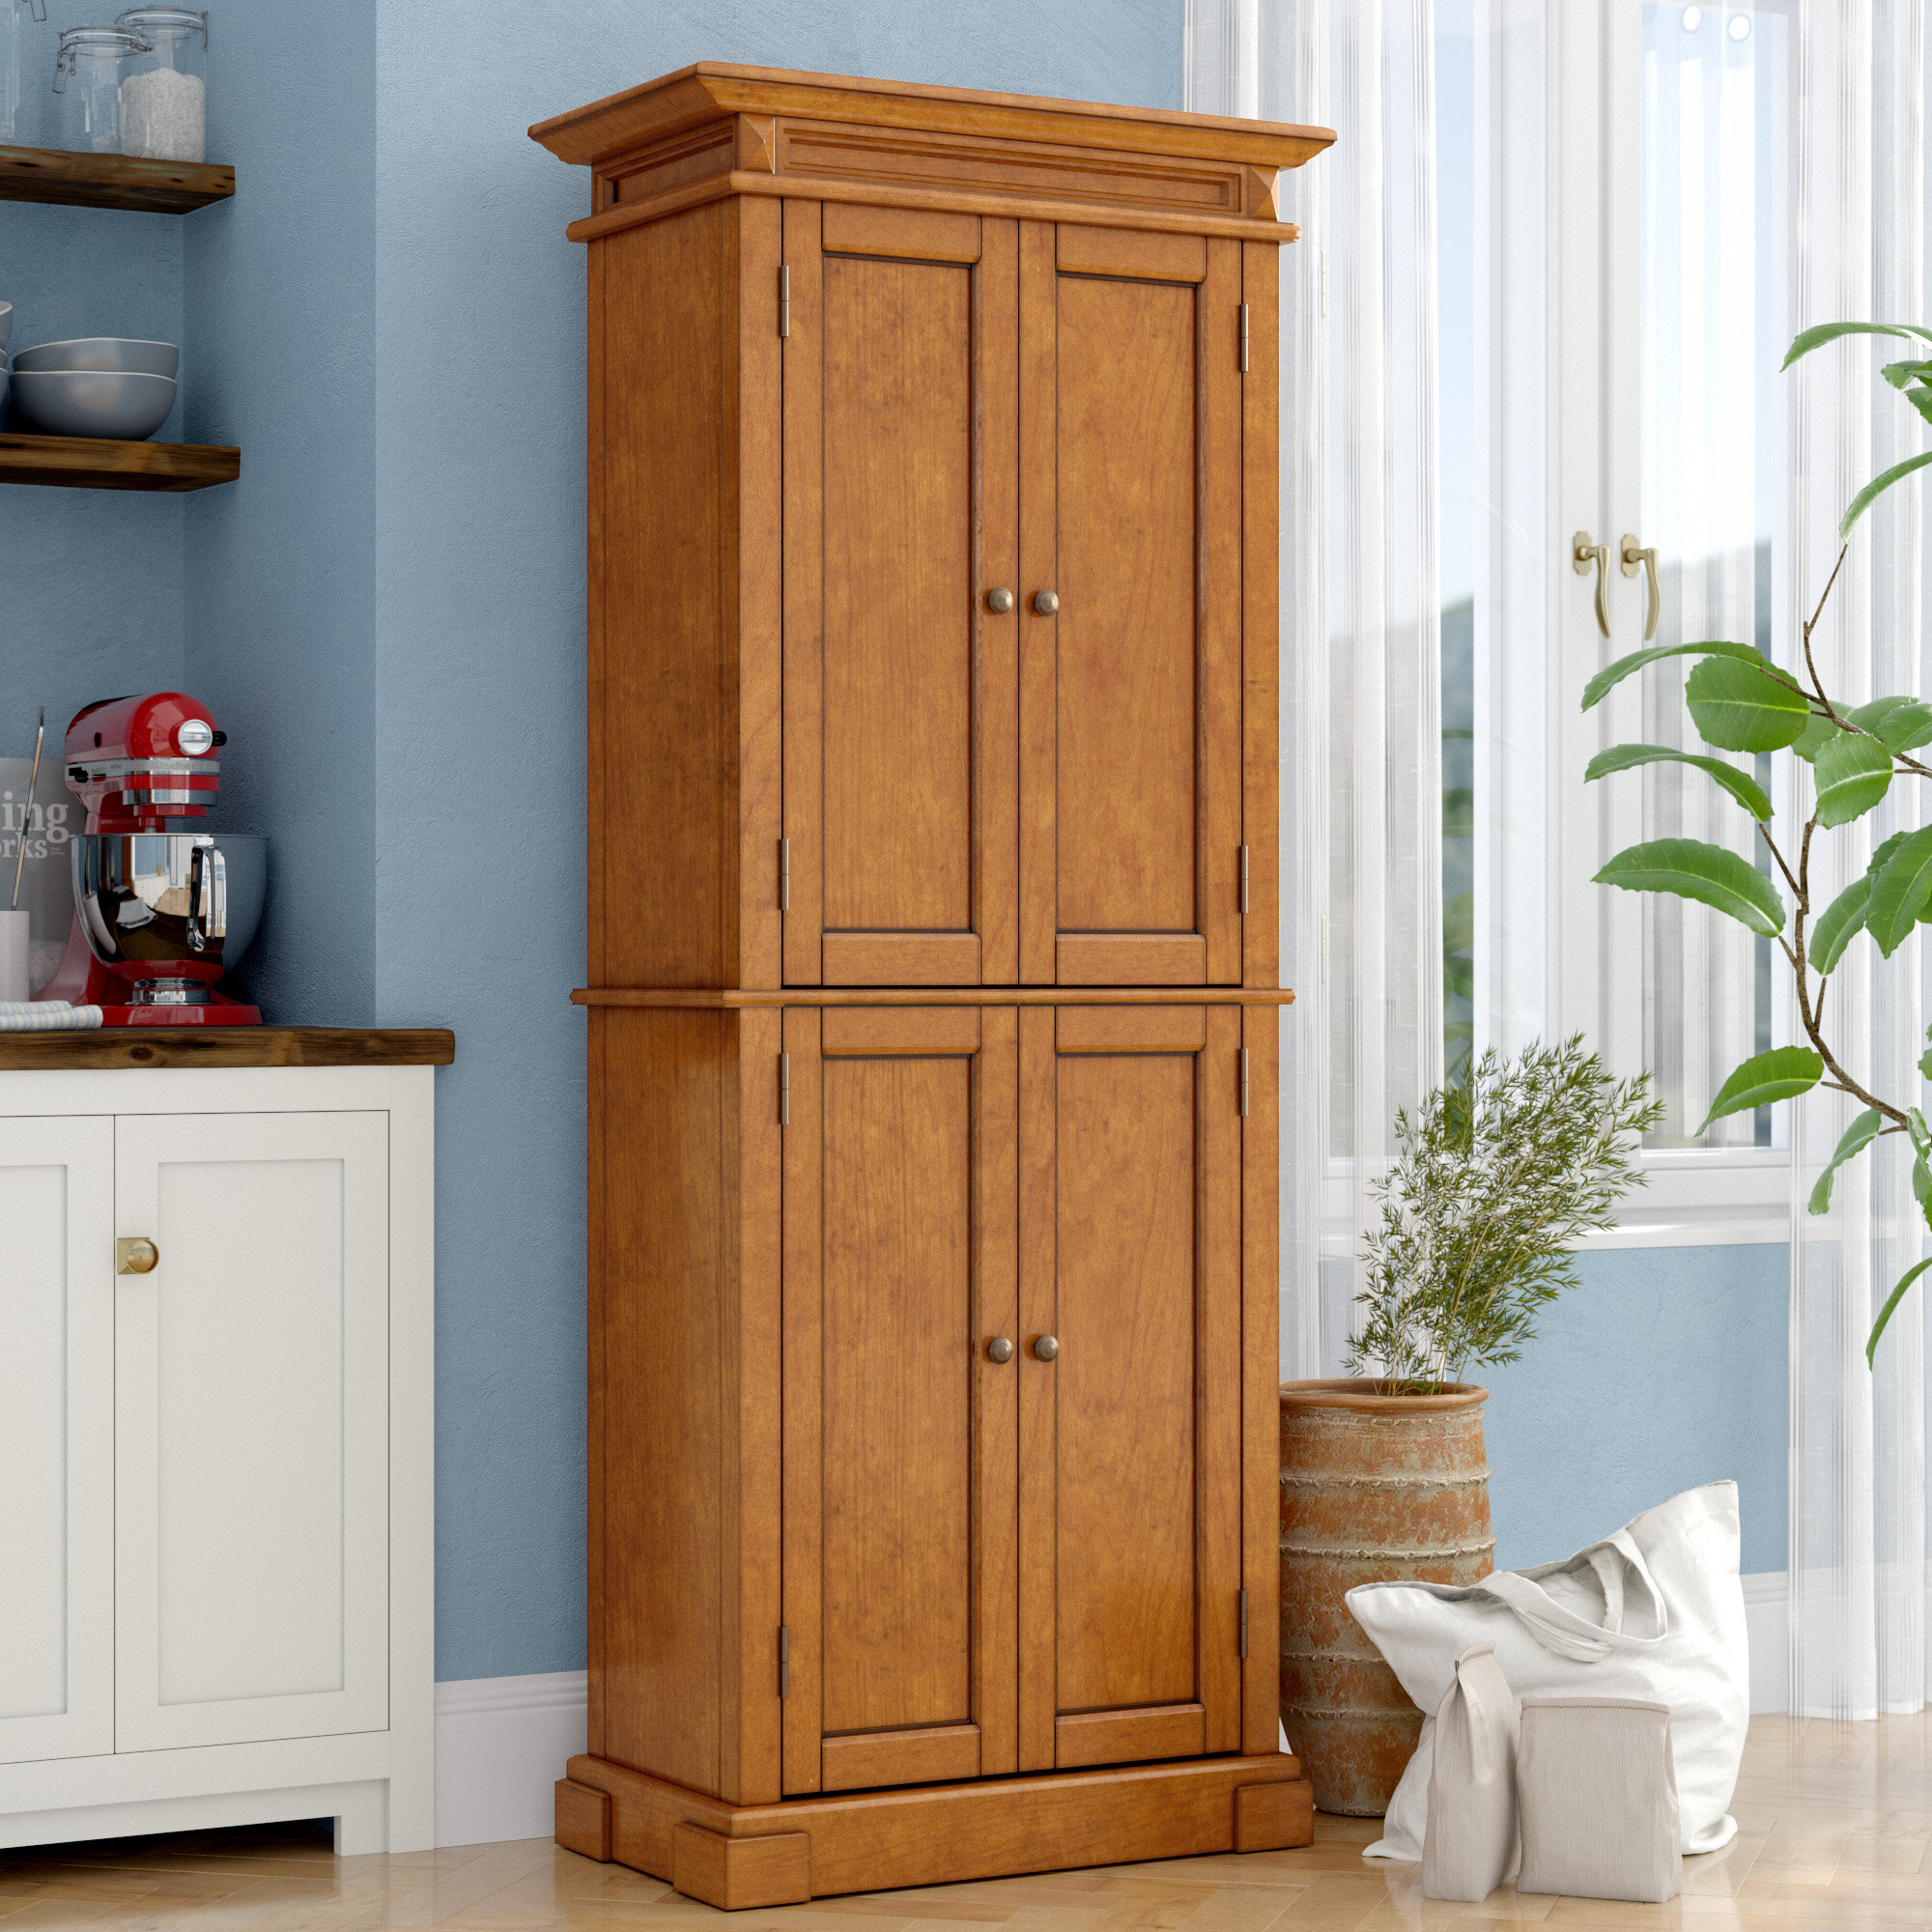 Free Standing Kitchen Pantry Furniture Pantry Kitchen Cabinet Cabinets ...